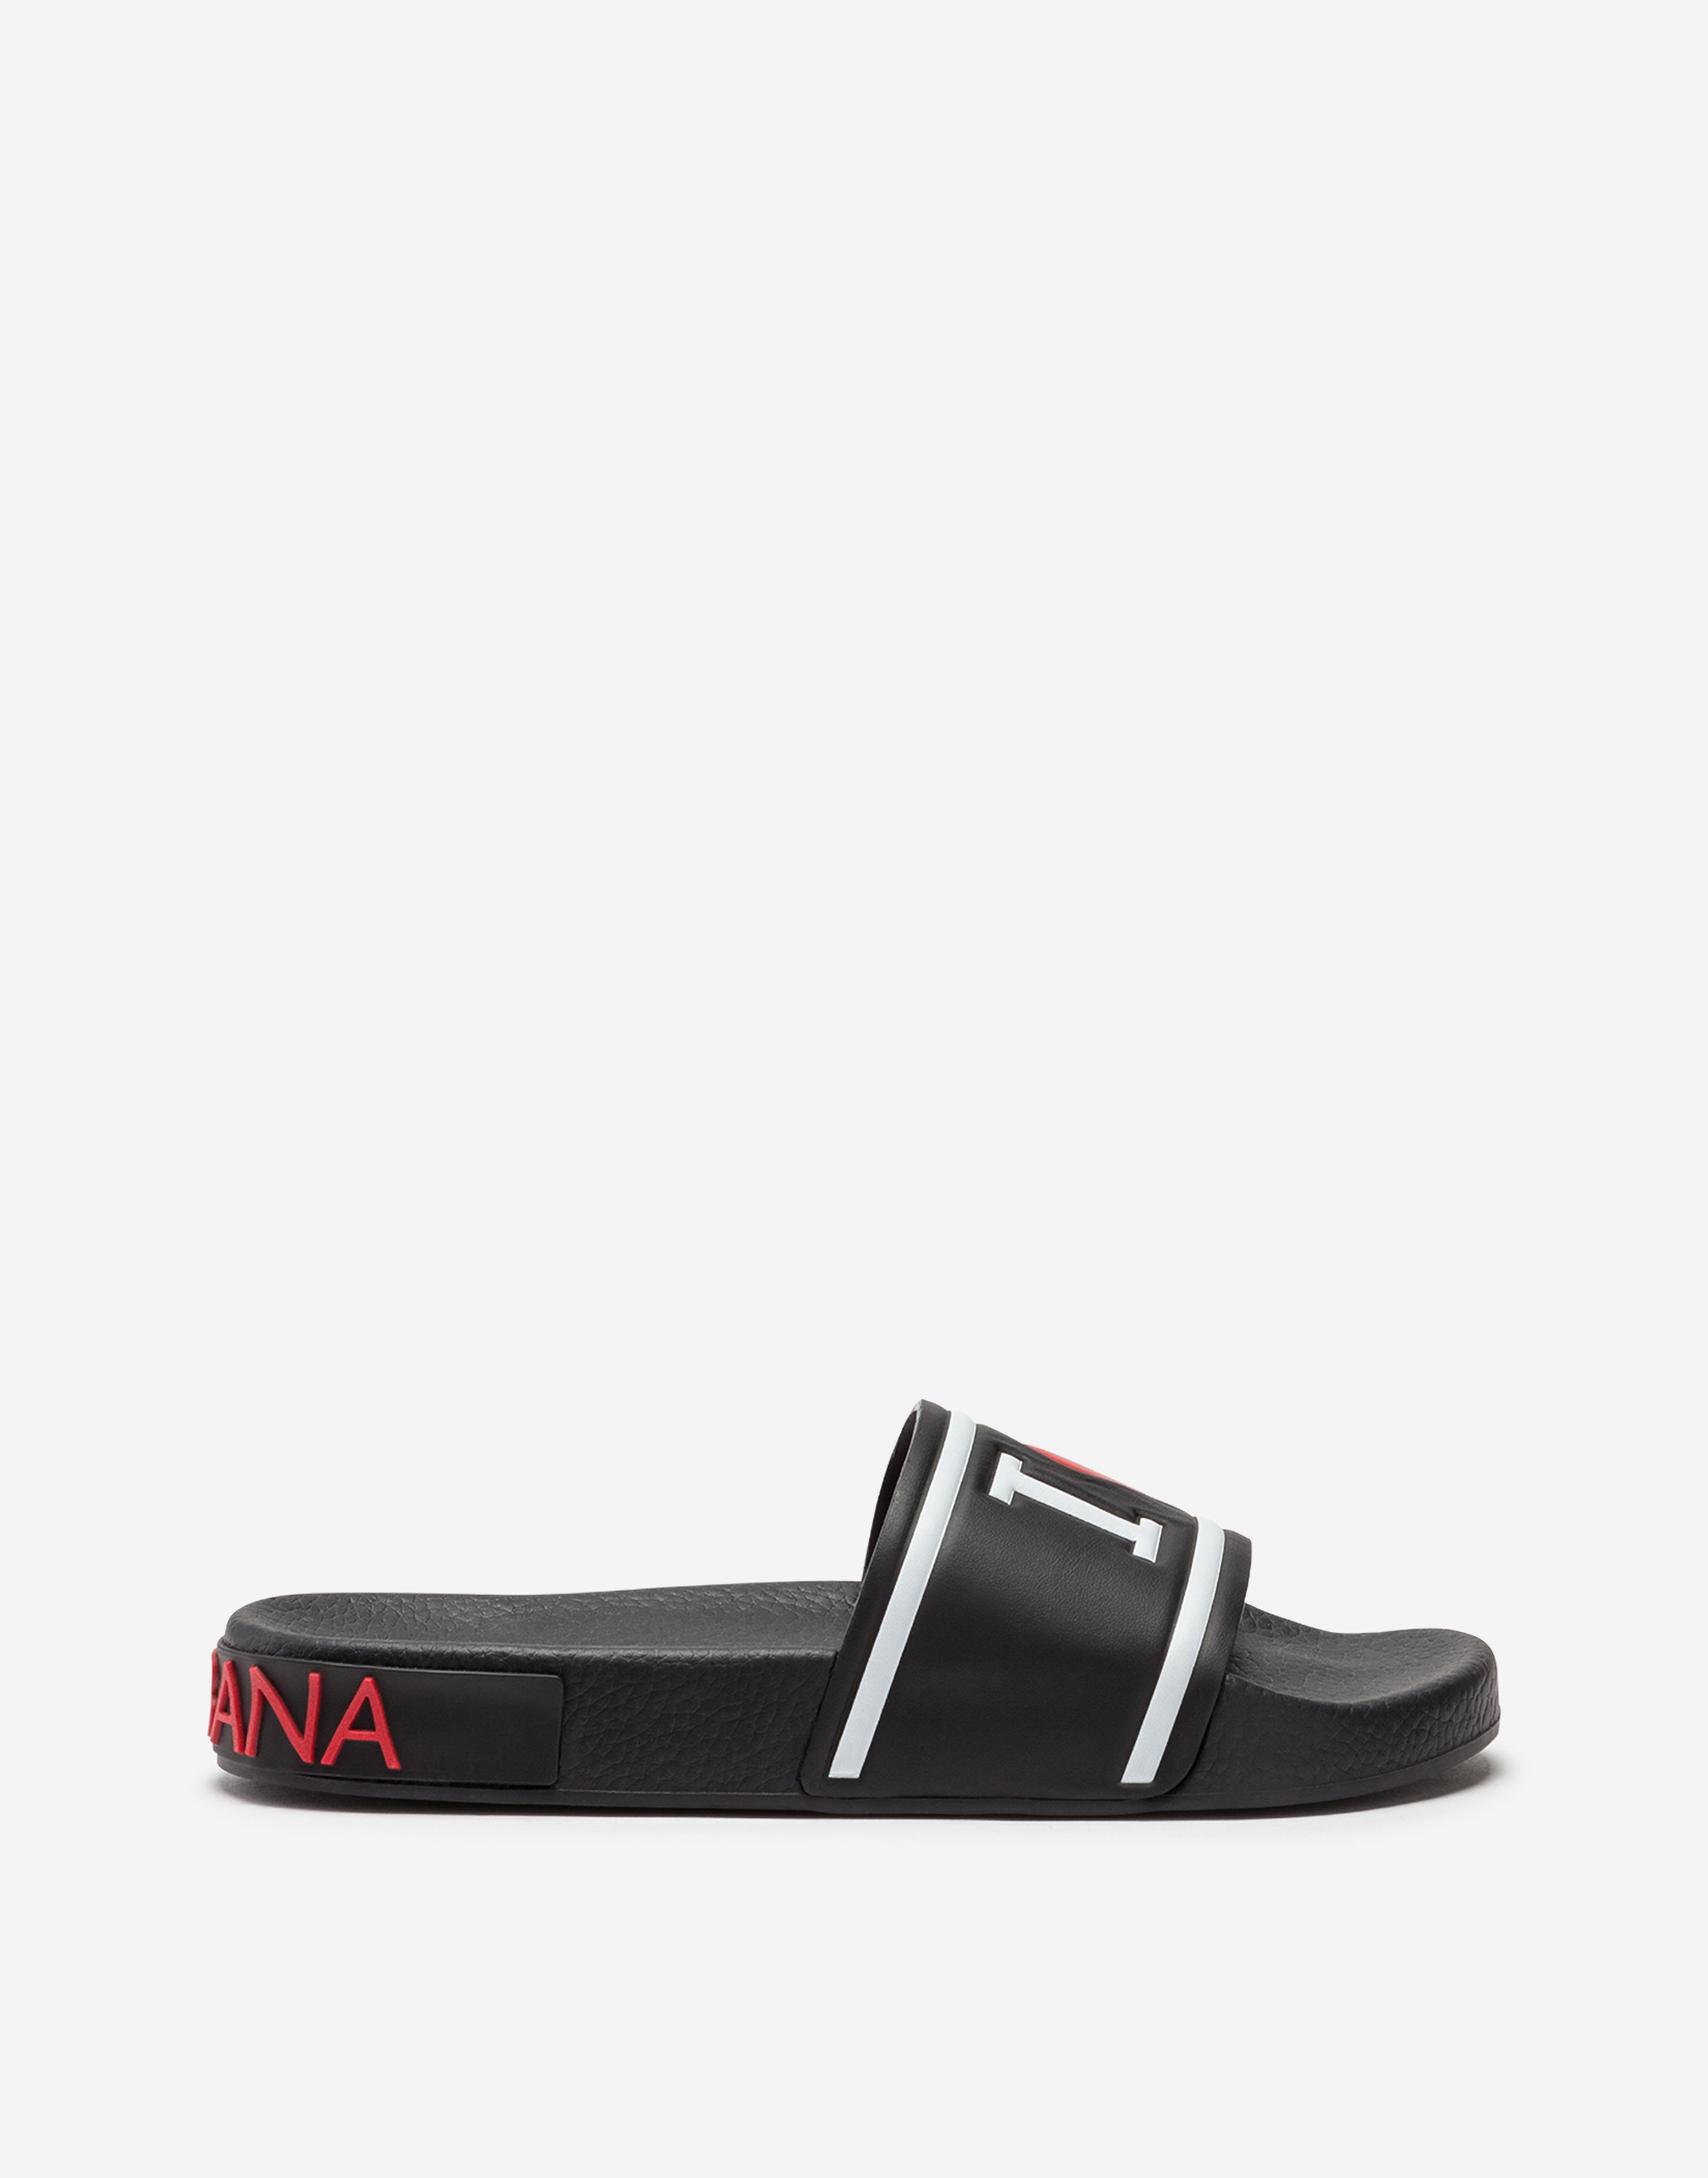 Rubber and calfskin slides with high-frequency detailing in Multicolor